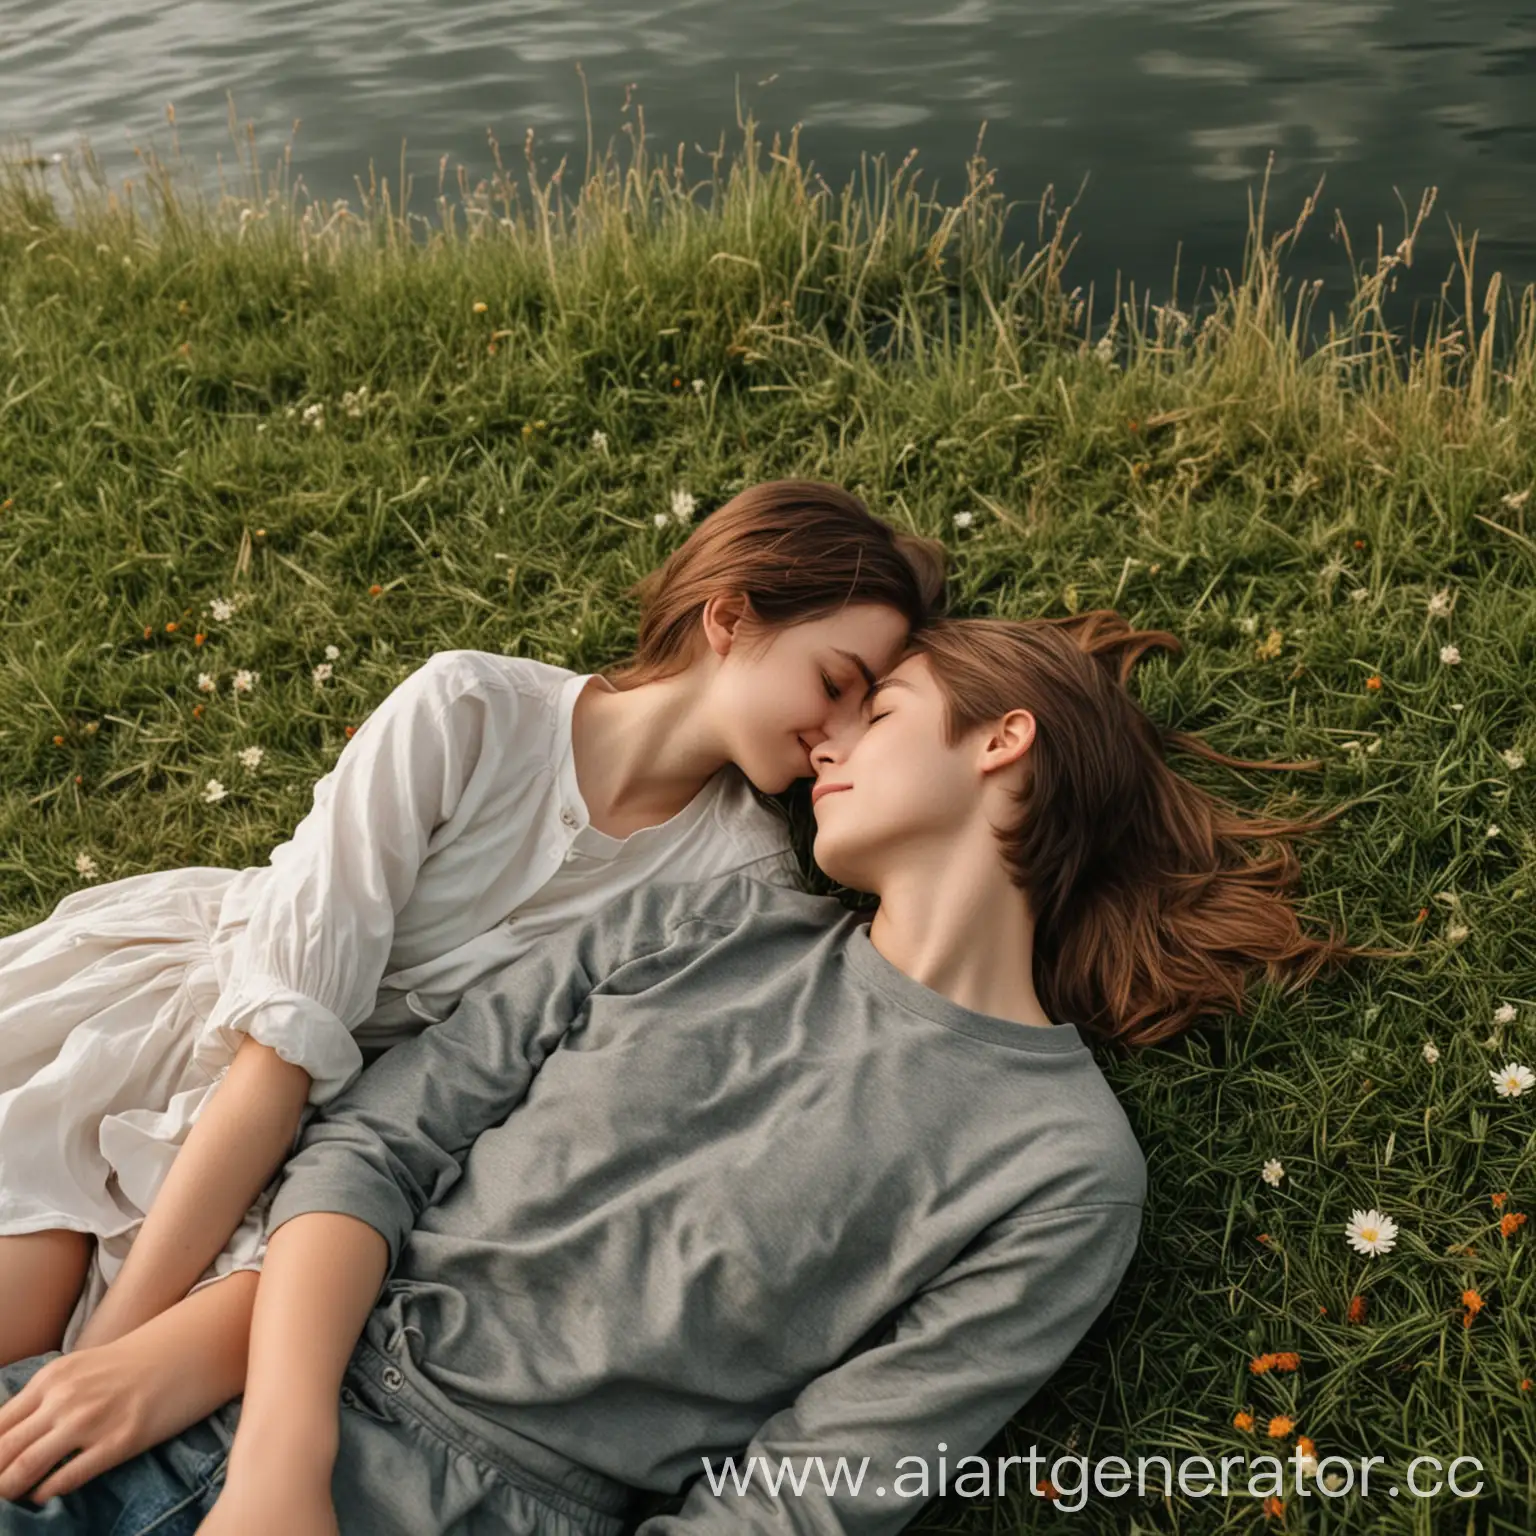 Girl-and-Boy-Enjoying-Romantic-Moment-by-the-Lake